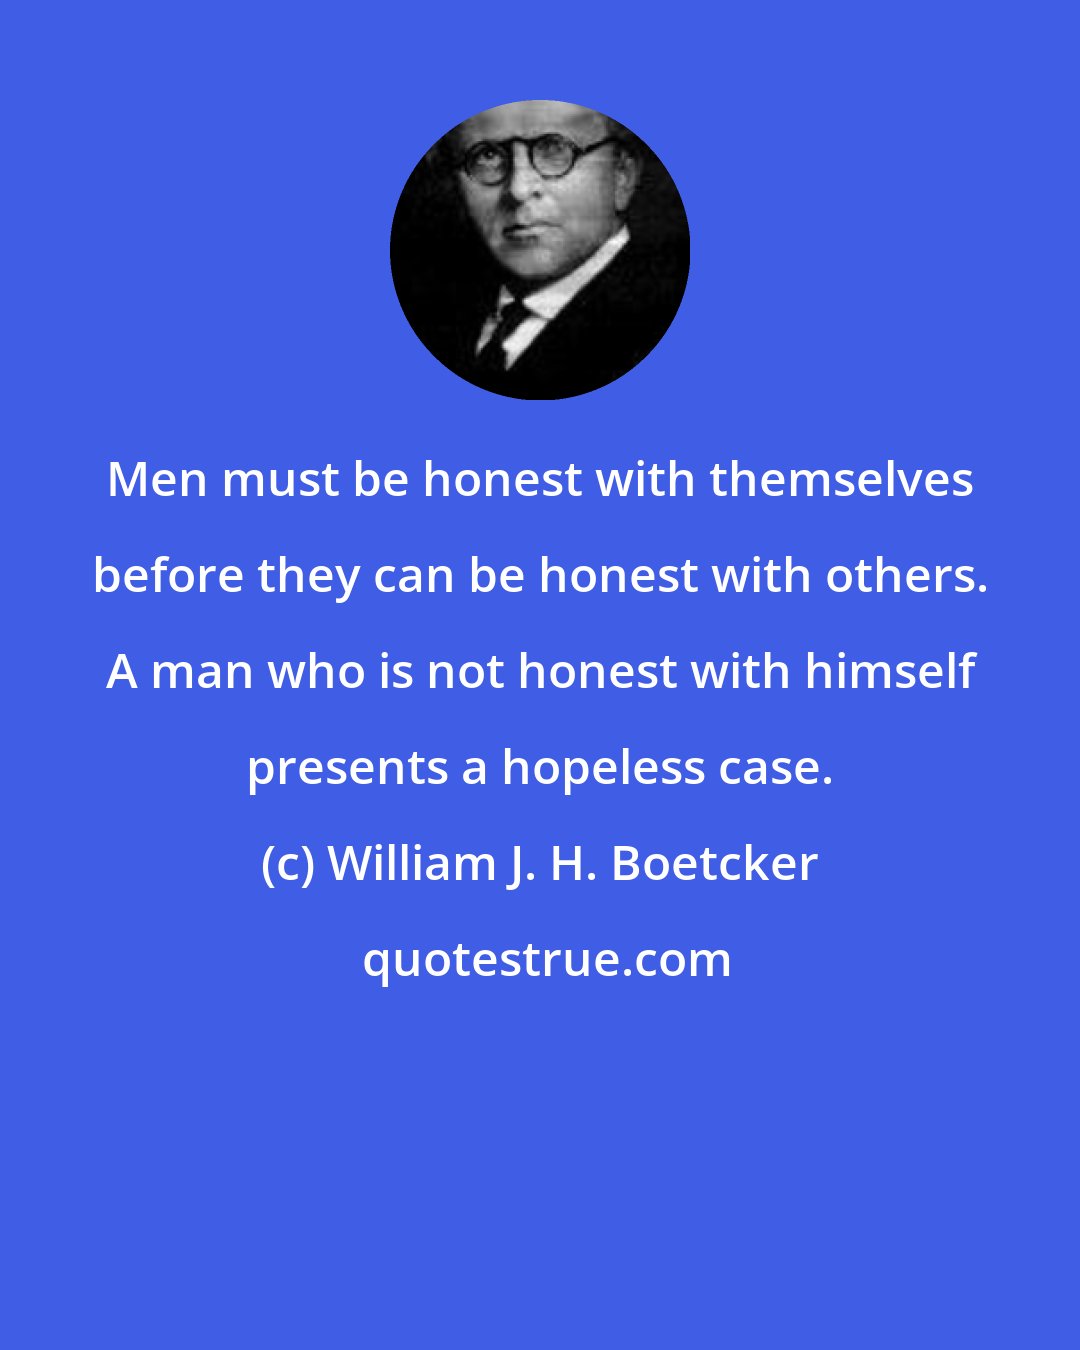 William J. H. Boetcker: Men must be honest with themselves before they can be honest with others. A man who is not honest with himself presents a hopeless case.